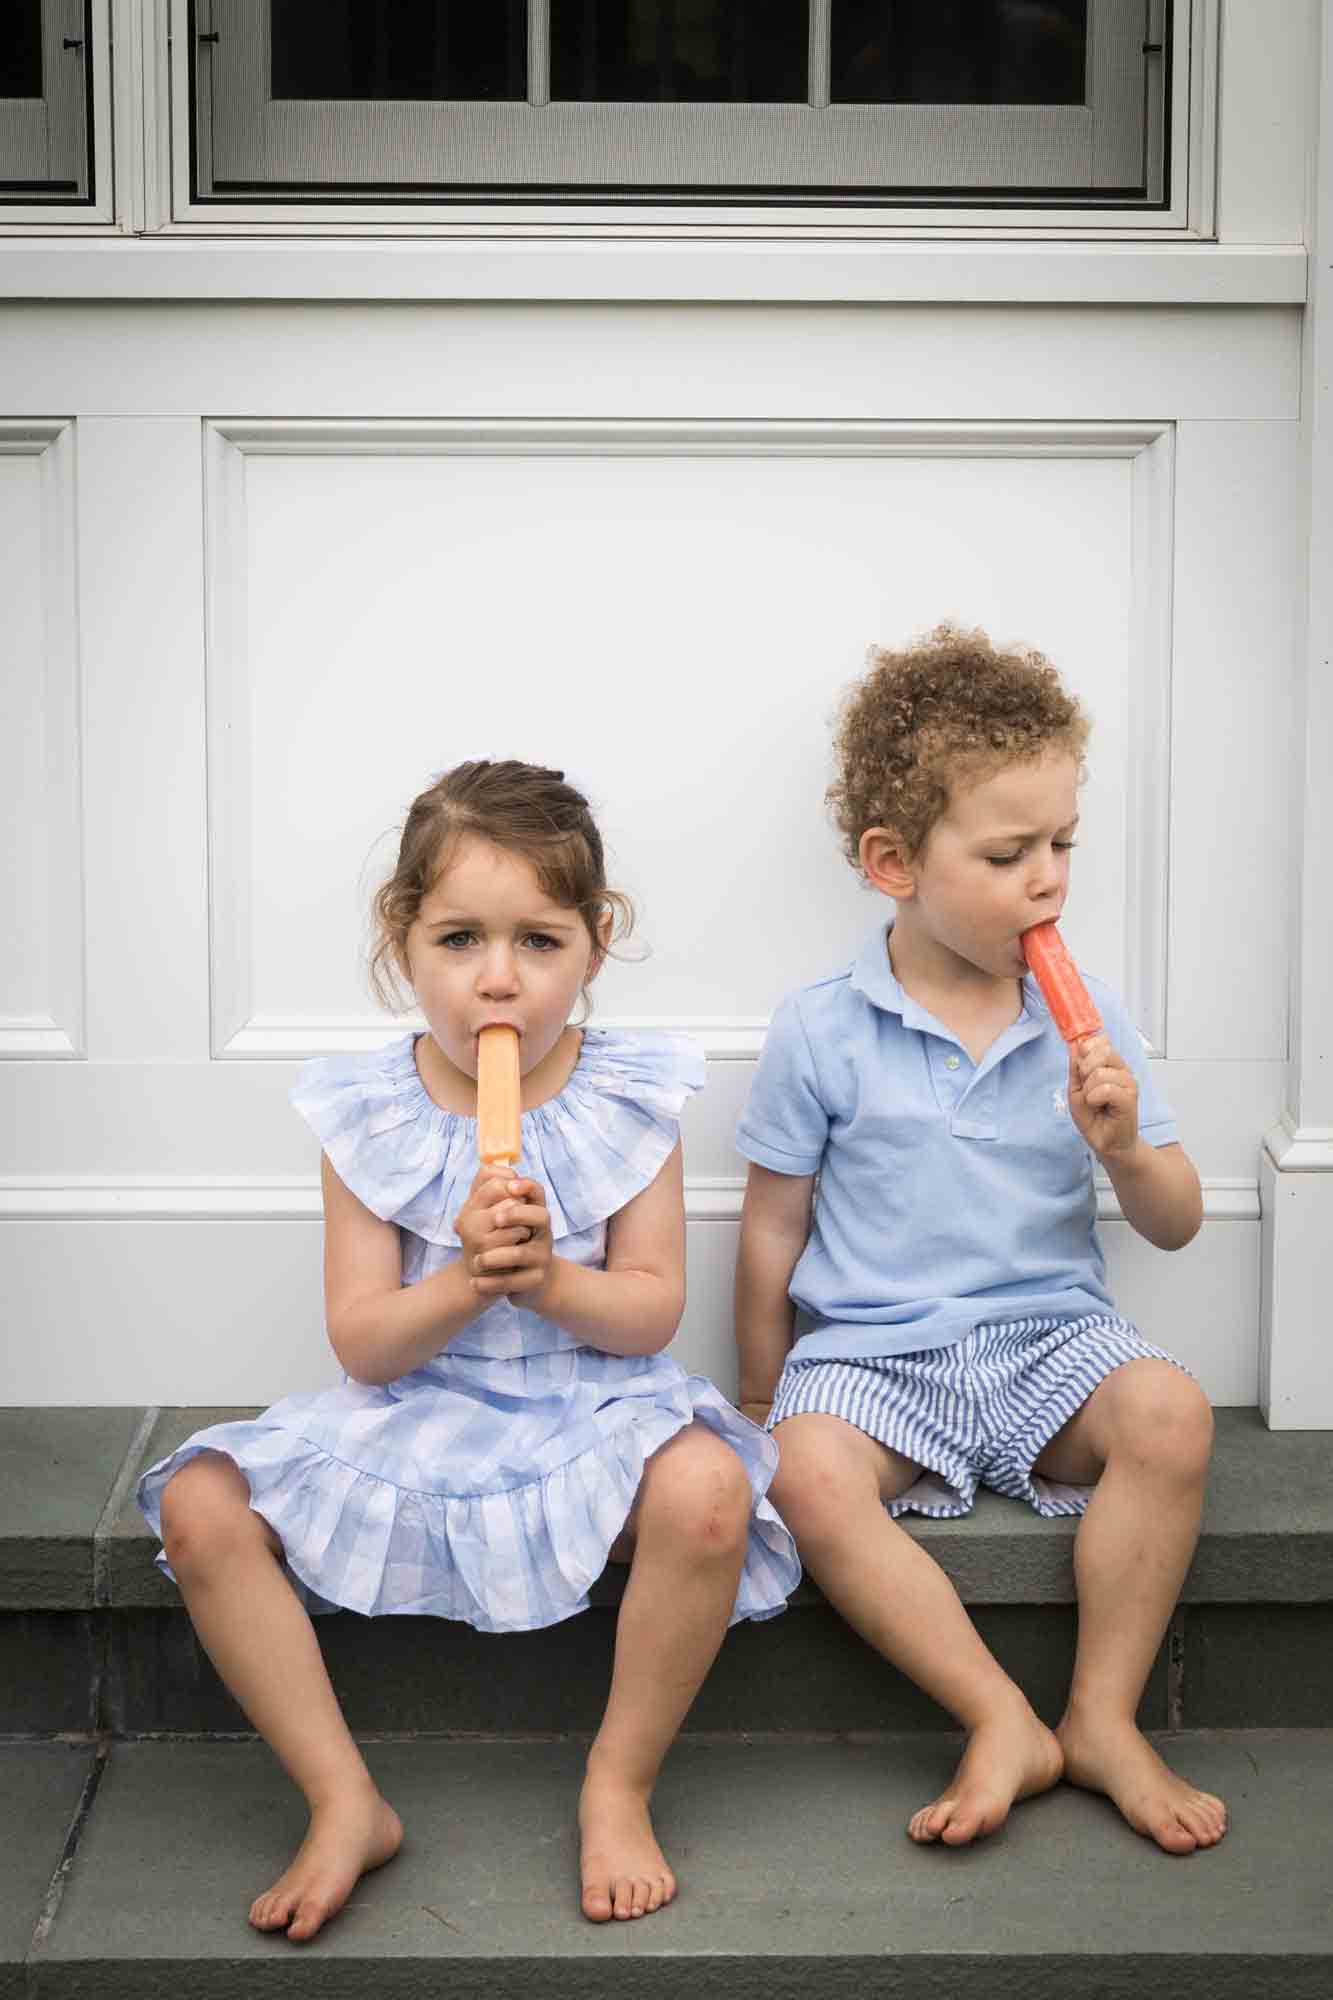 Little boy and girl sitting on steps eating popsicles